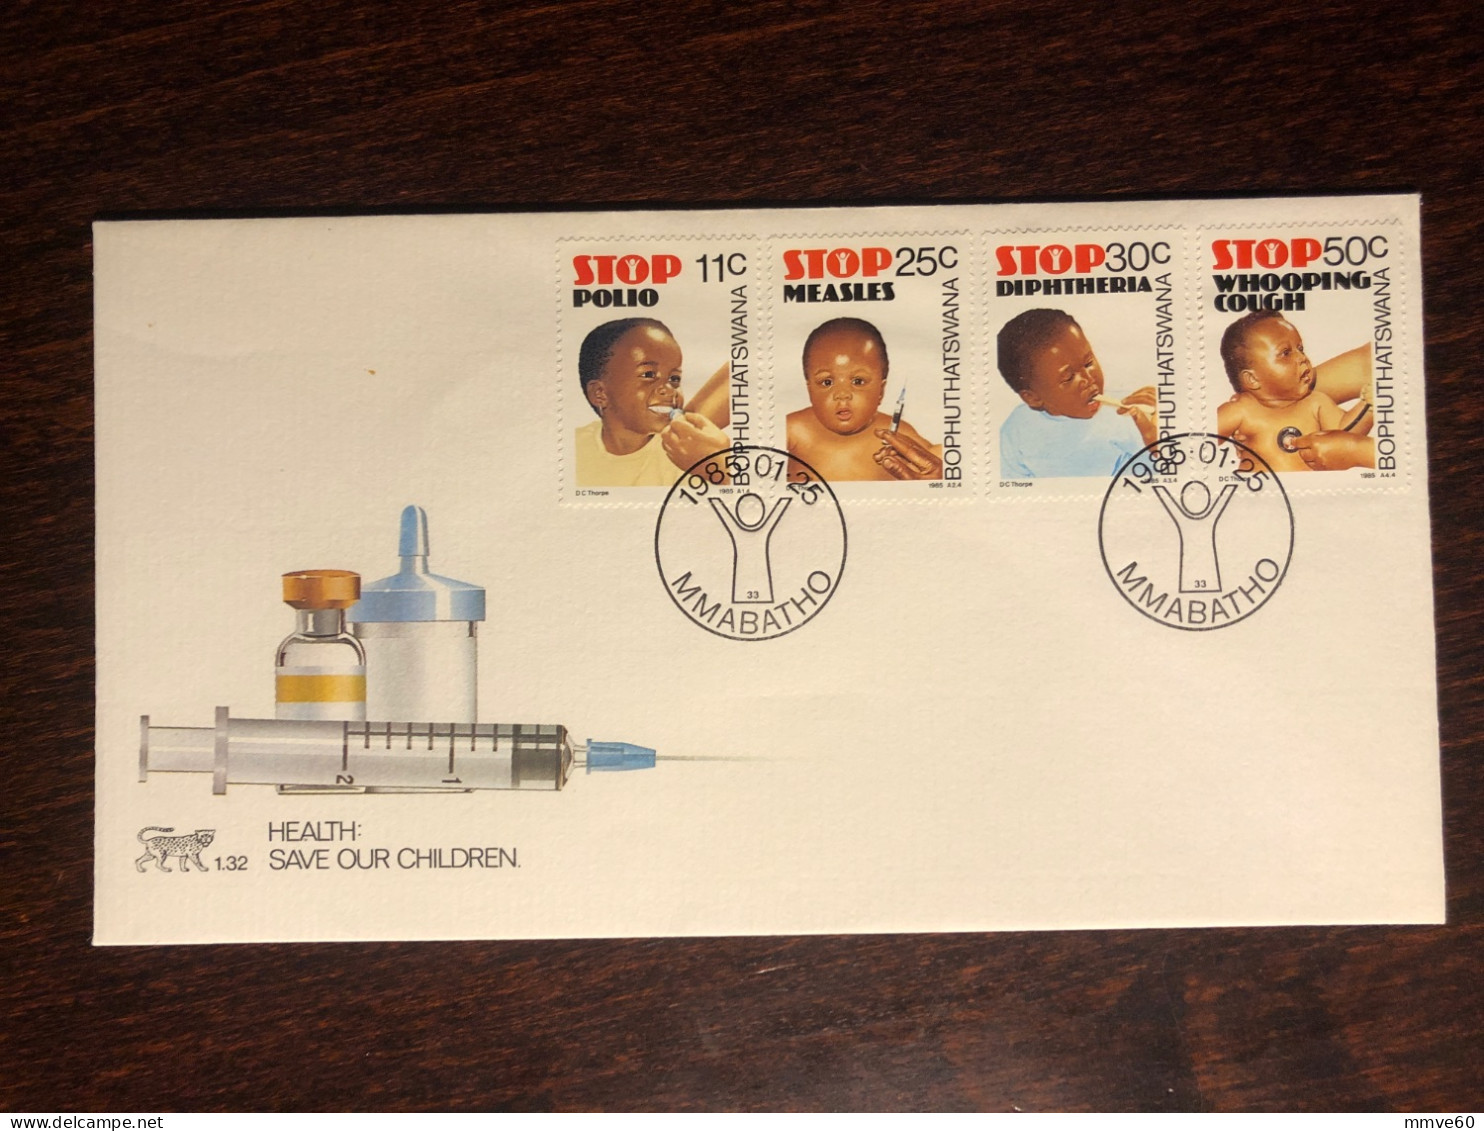 BOPHUTHATSWANA FDC COVER 1985 YEAR DISEASES POLIO MEASLES DIPHTHERIA HEALTH MEDICINE STAMPS - Bophuthatswana